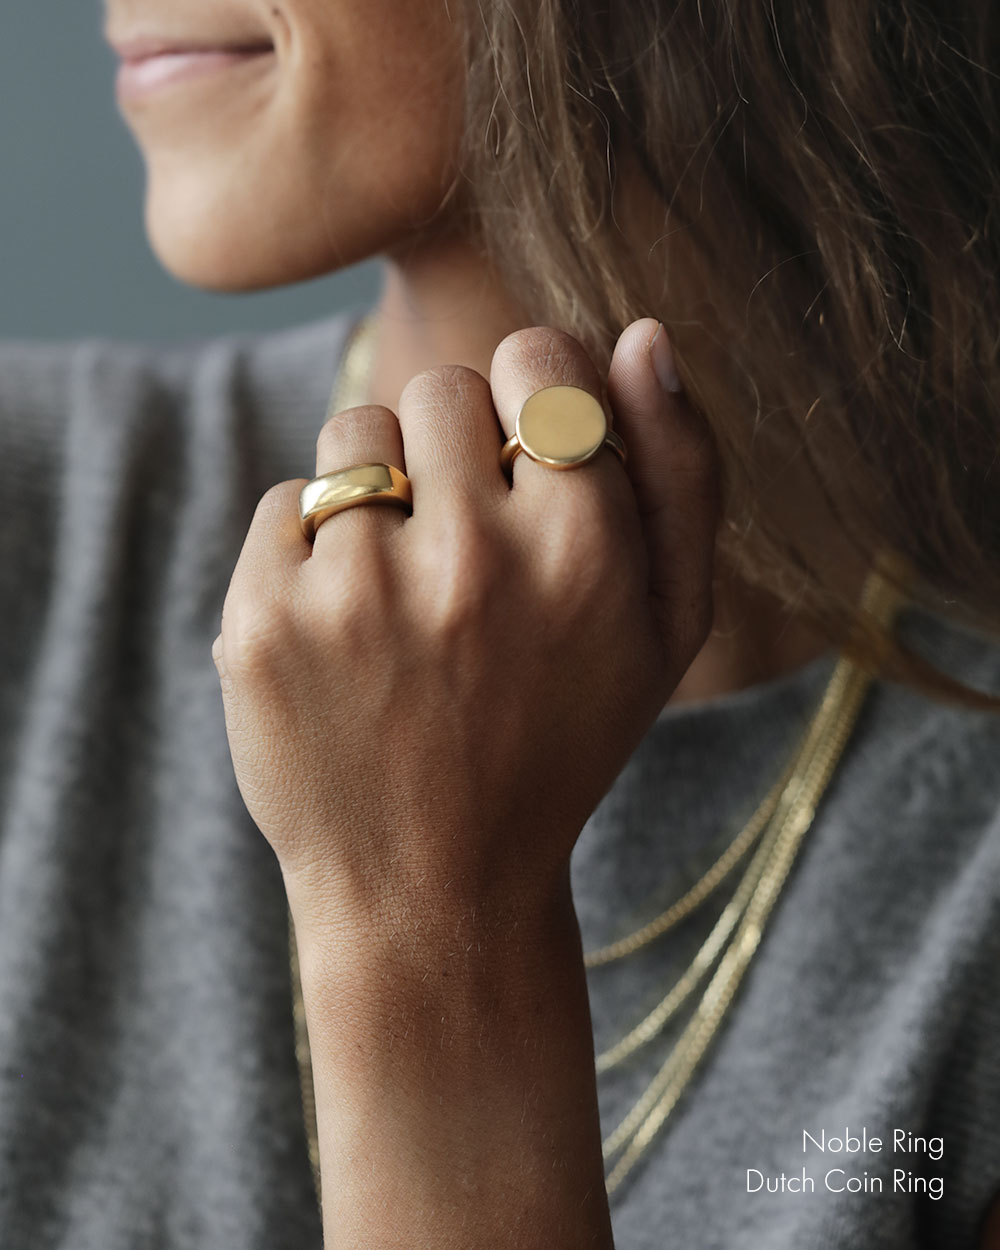 White woman with her hand on her chin, wearing a solid 18k yellow gold heavy ring. Noble Ring by George Rings for men, women, and all genders.